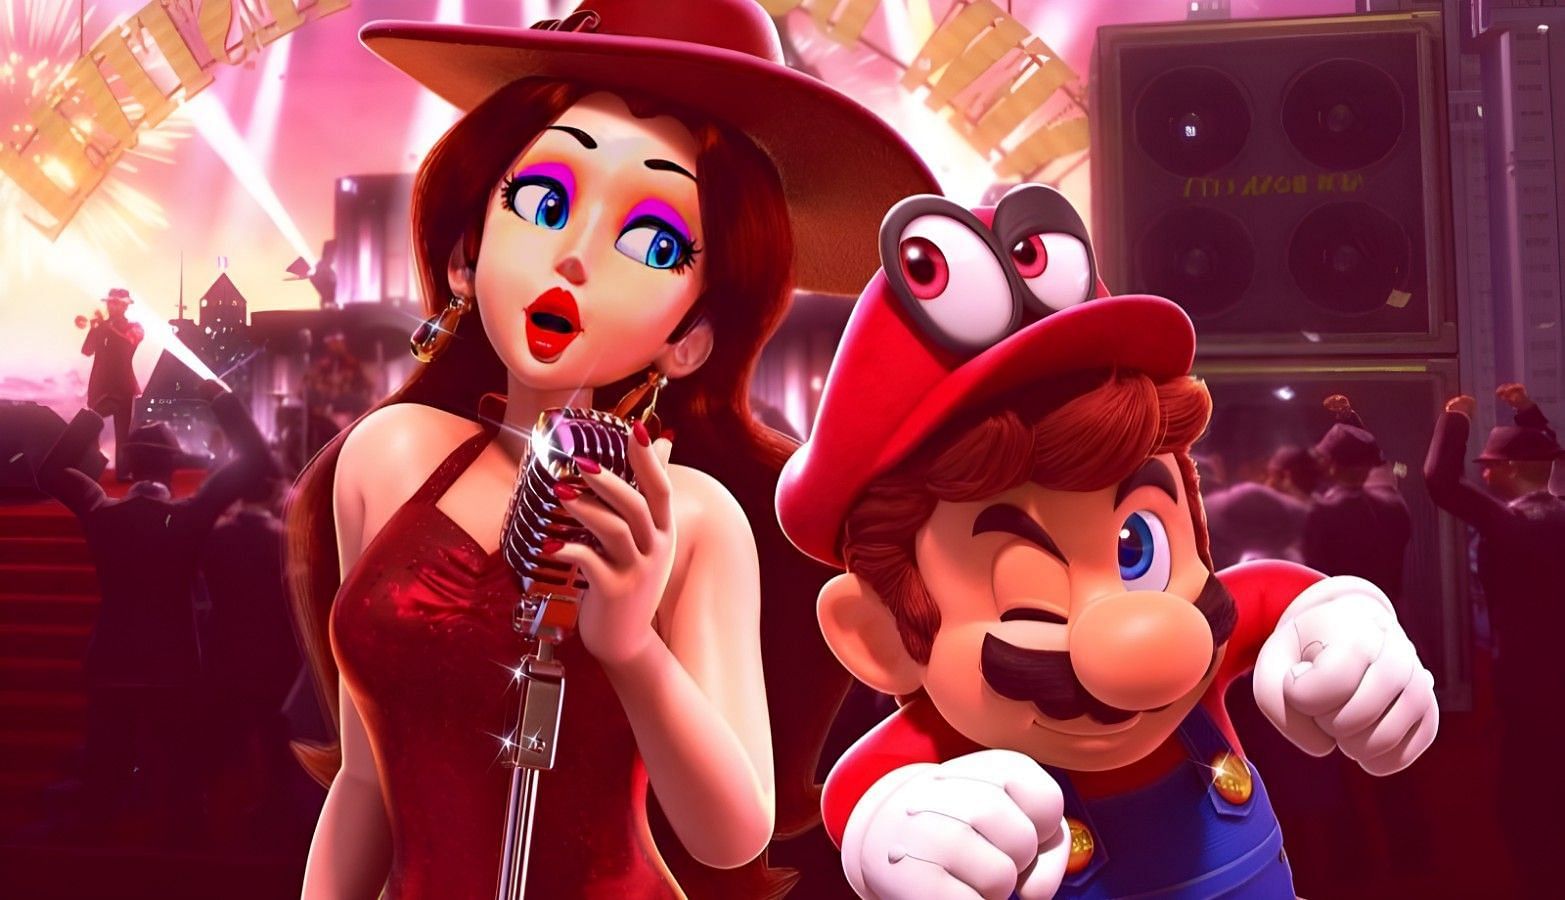 Pauline appeared in the original Donkey Kong arcade game (Image via Universal Pictures)